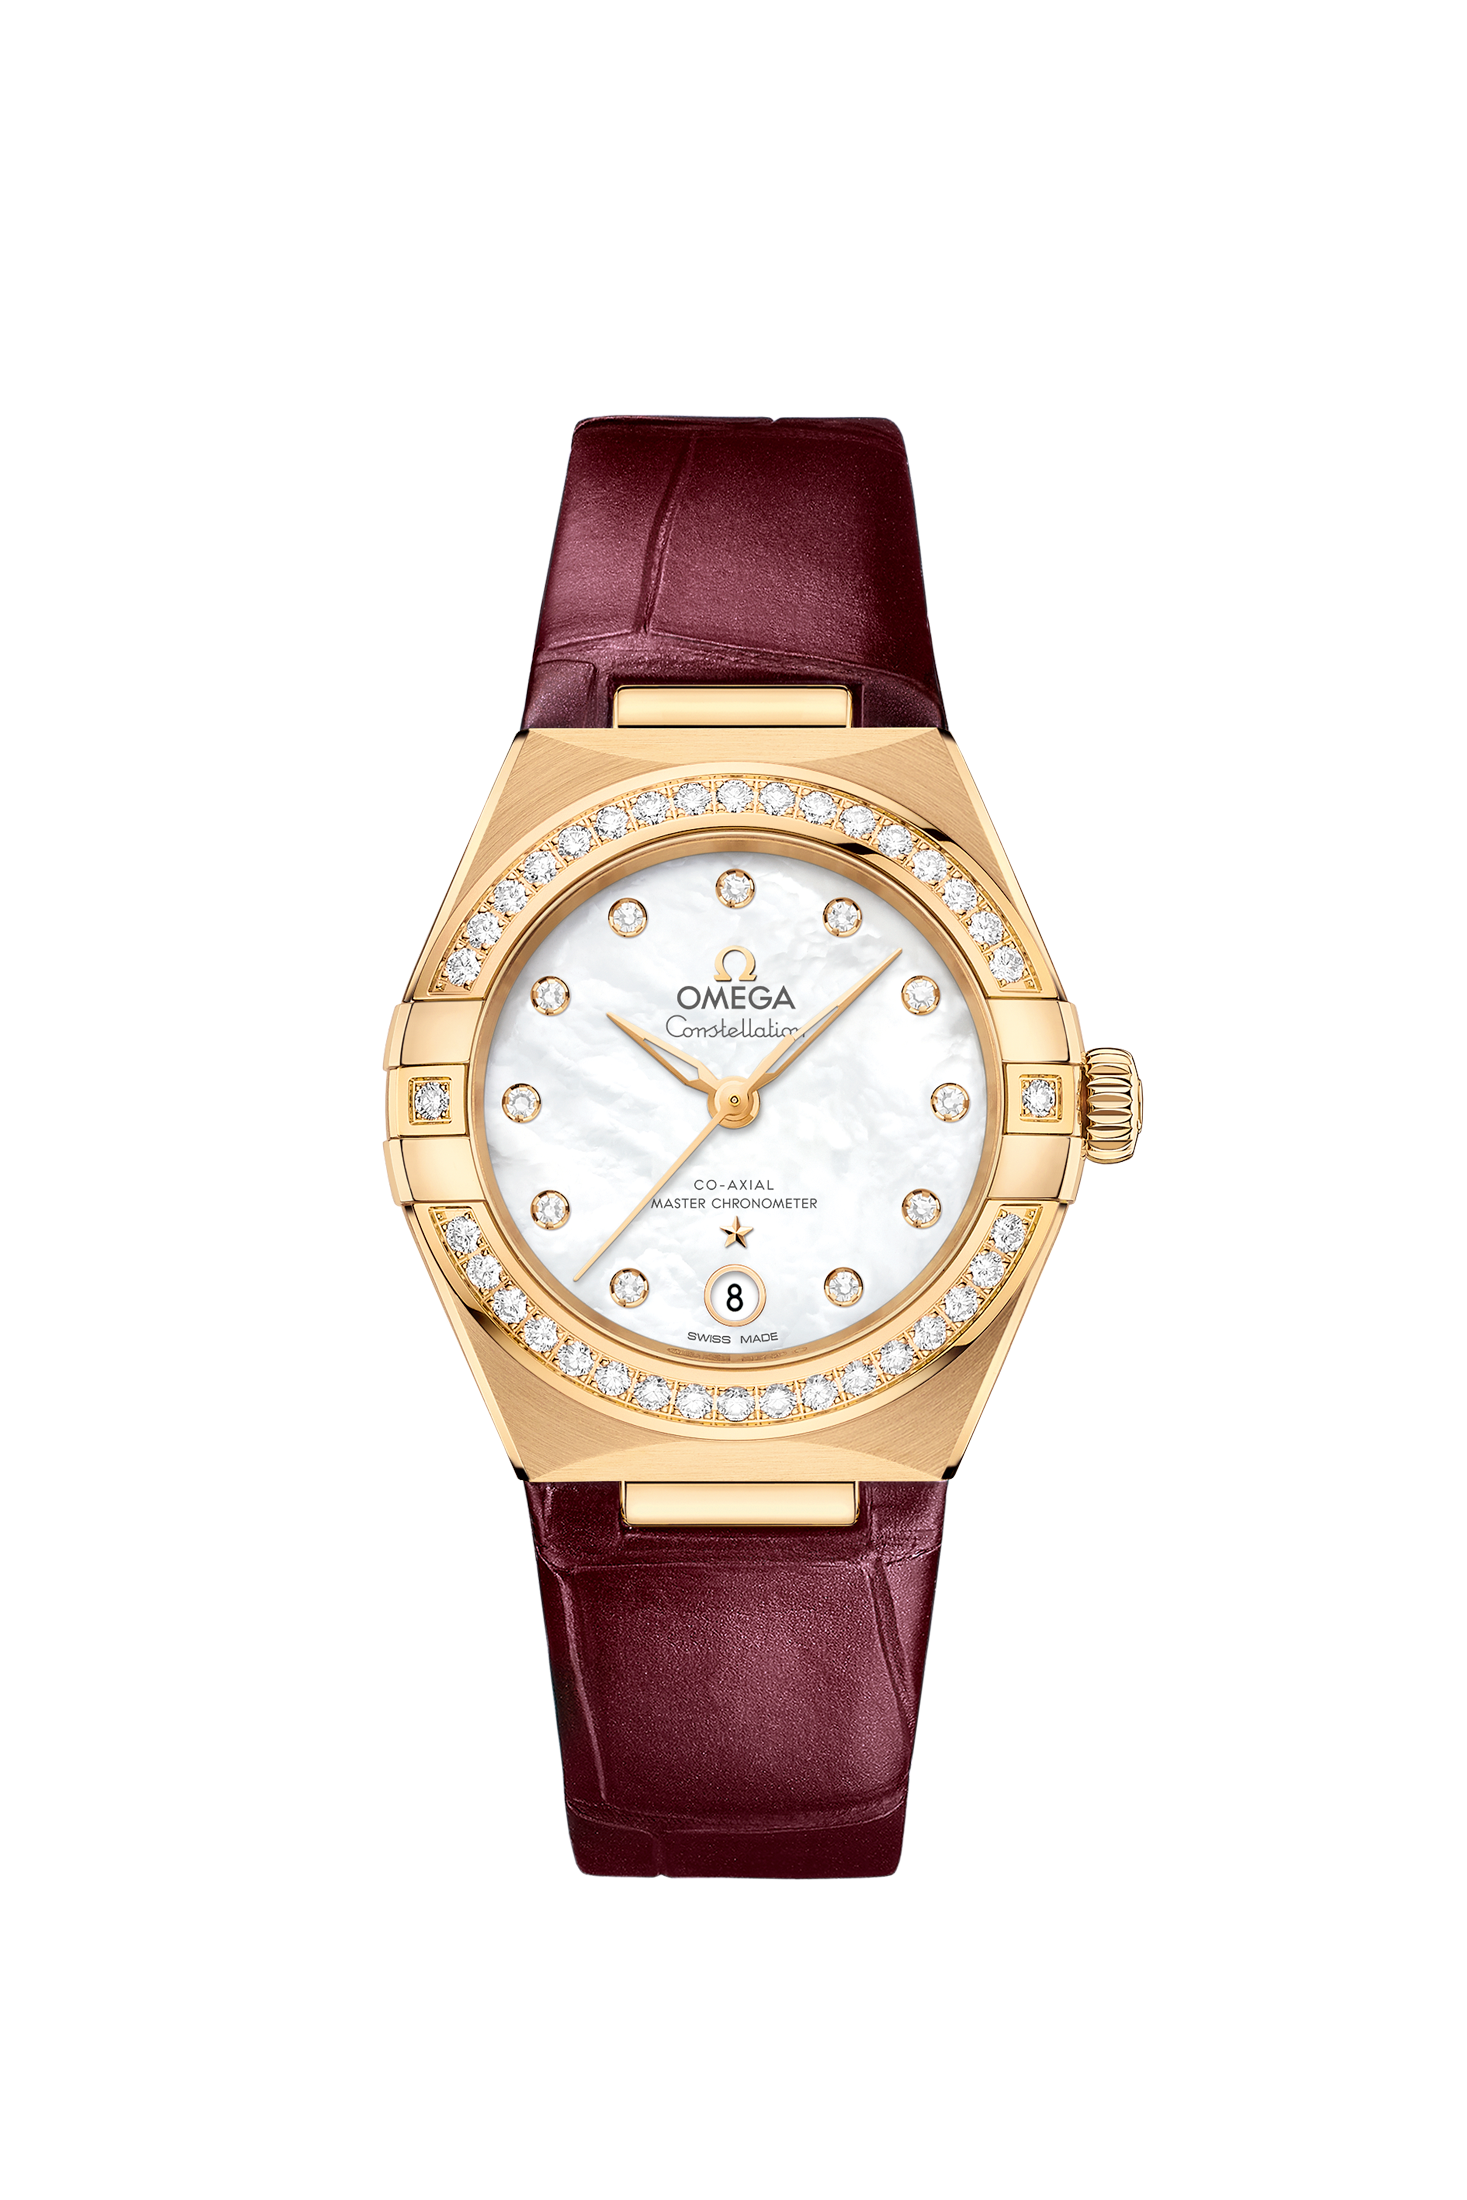 Ladies' watch  OMEGA, Constellation Co Axial Master Chronometer / 29mm, SKU: 131.58.29.20.55.001 | watchphilosophy.co.uk